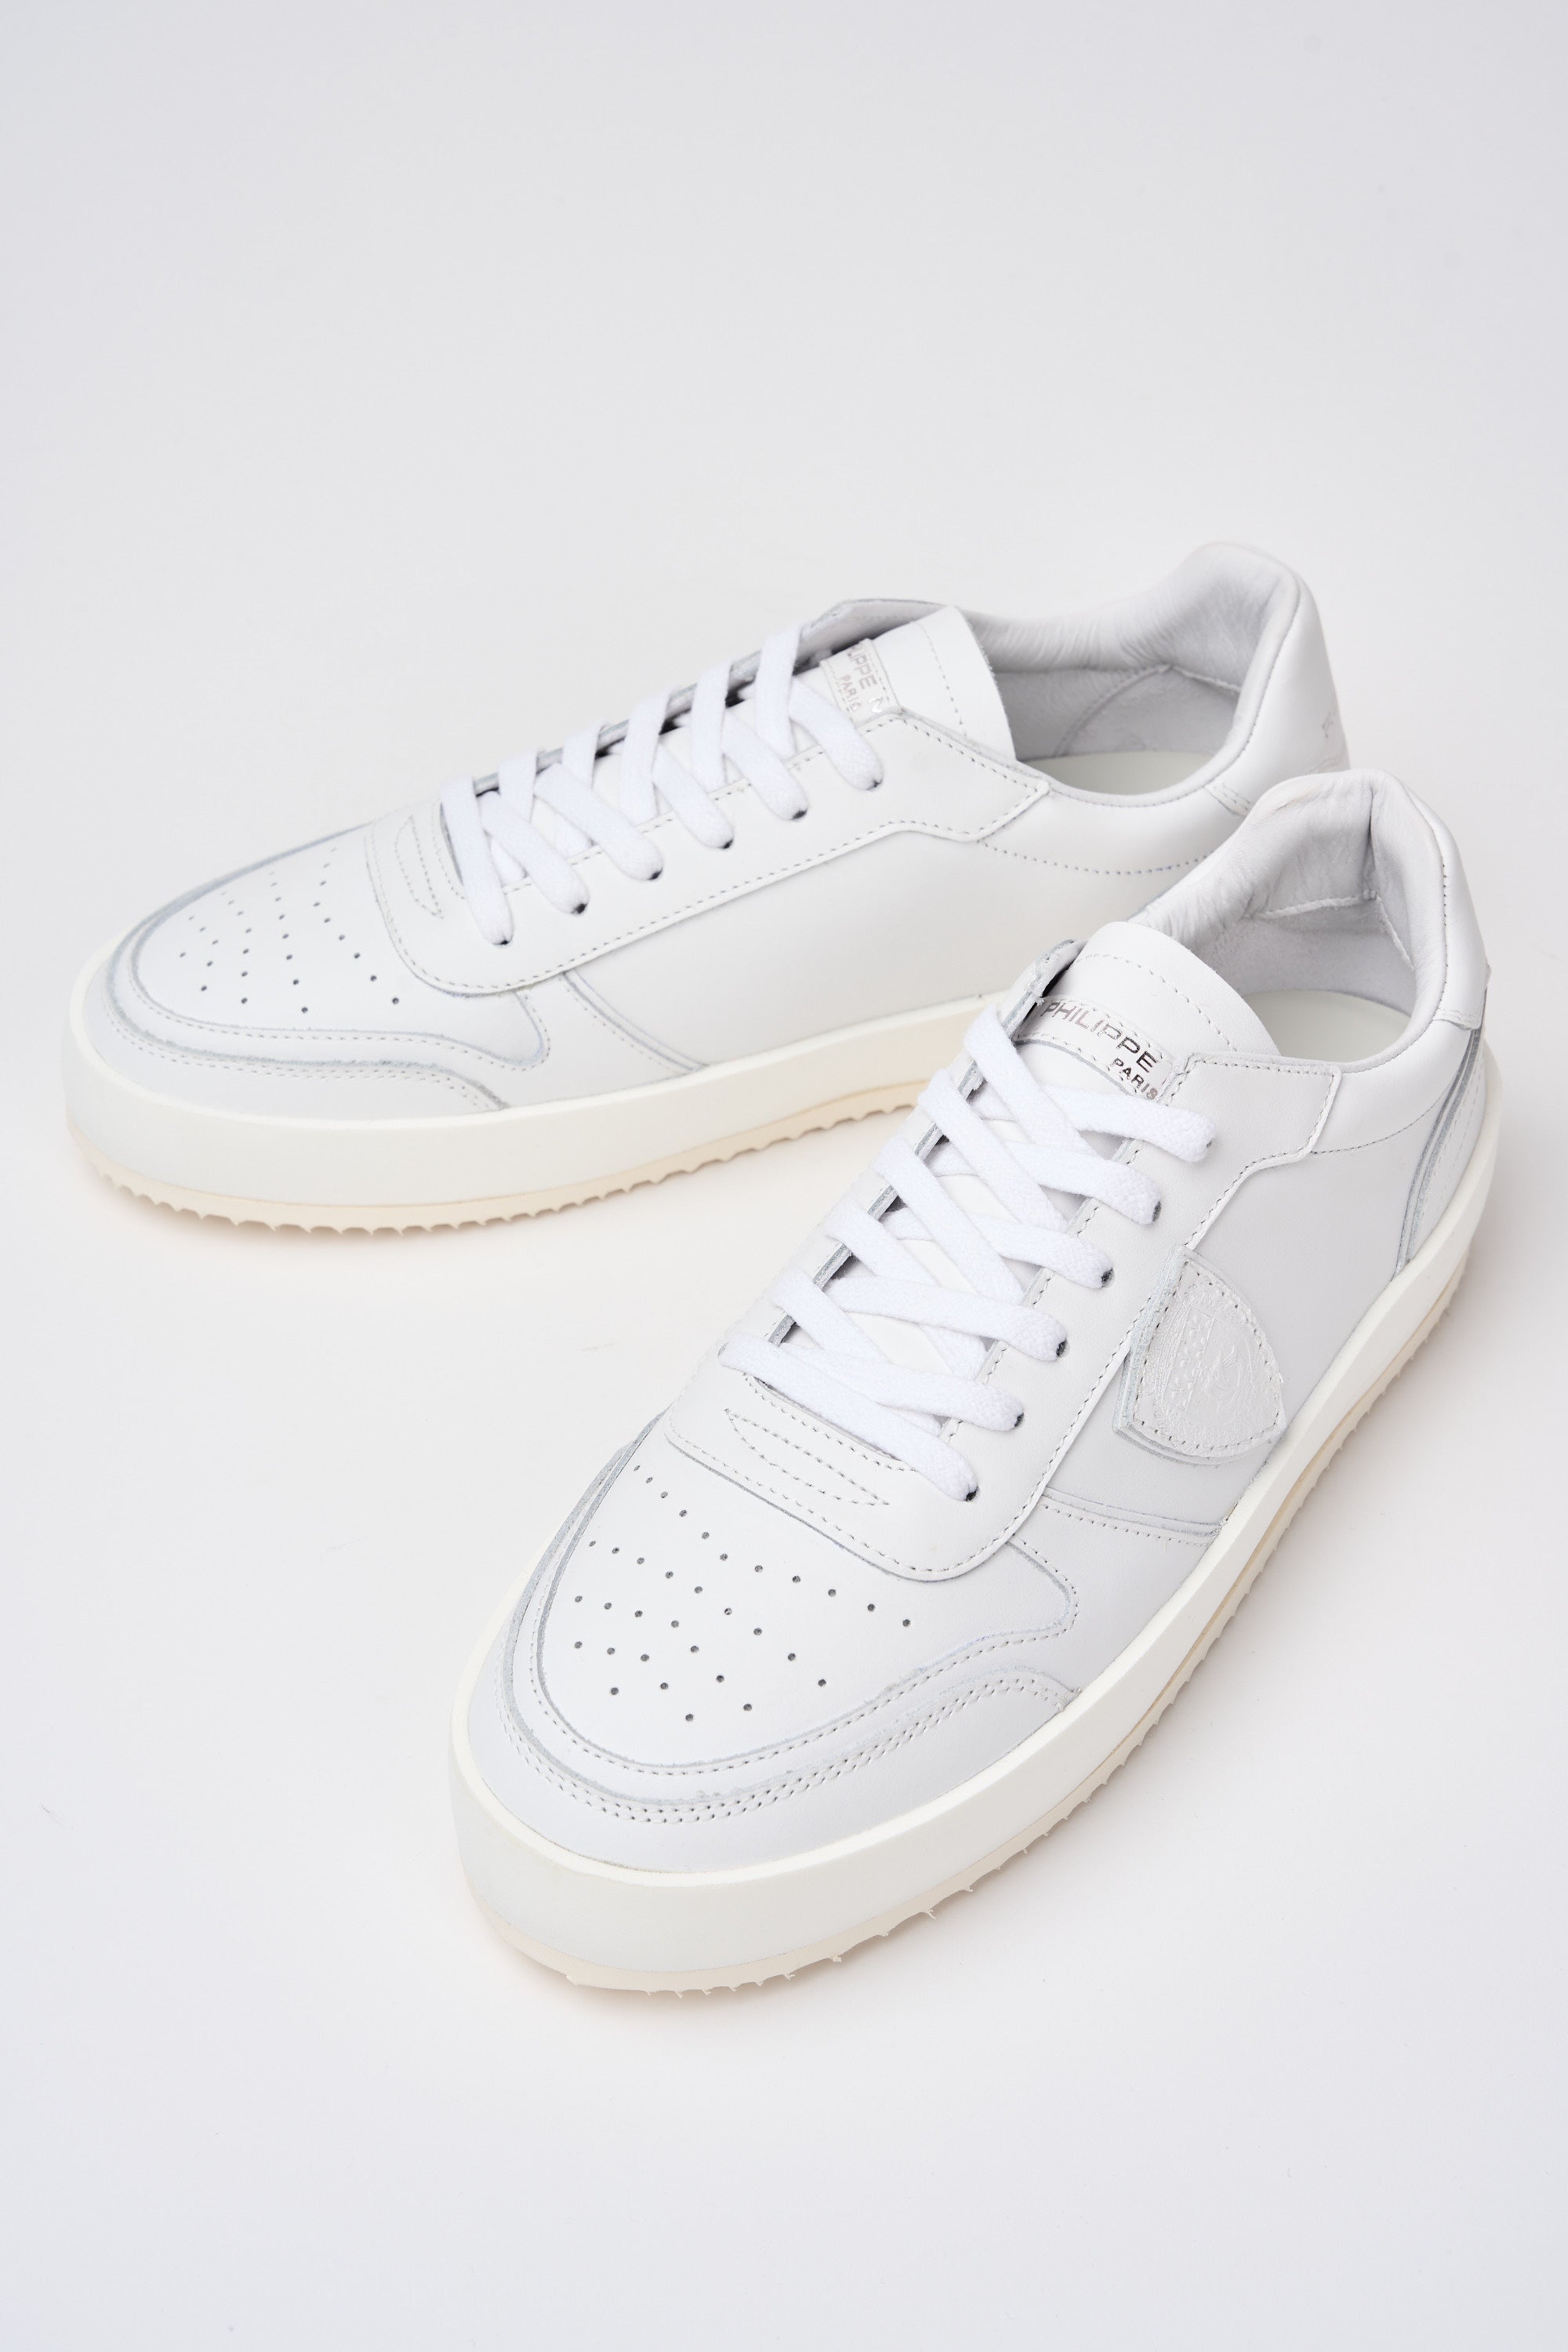 Philippe Model Sneaker Nice in Leather White-6